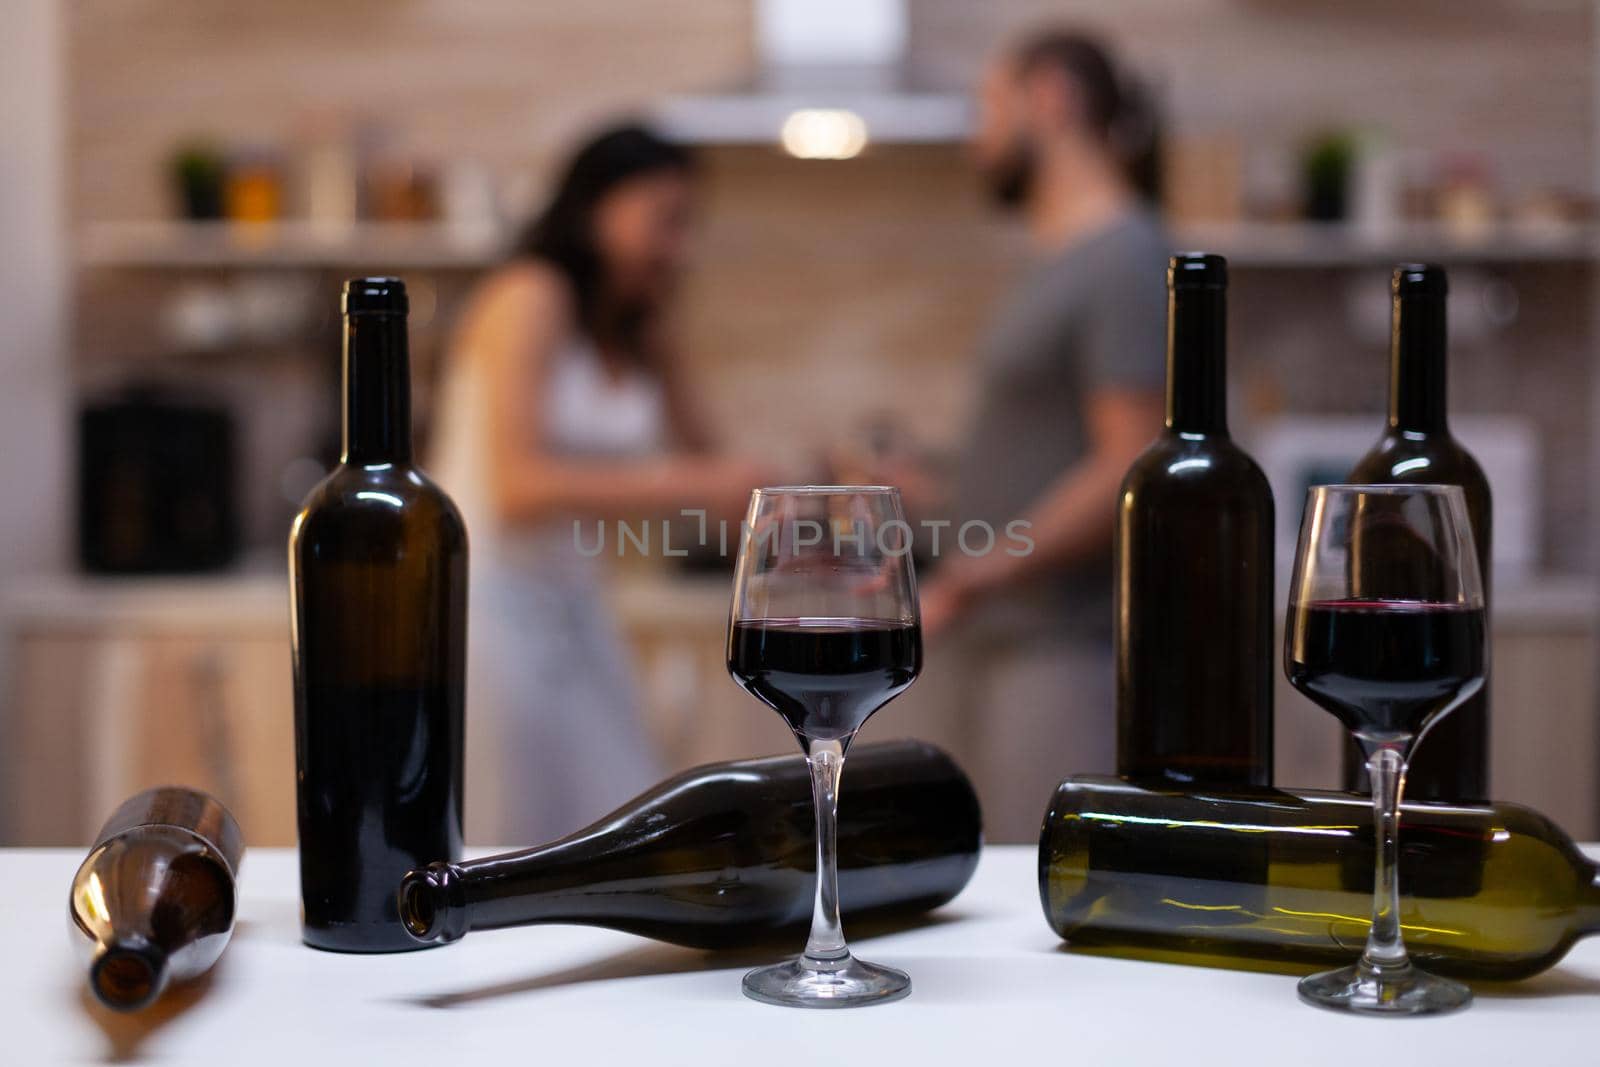 Close up of bottles and glasses filled with wine, liquor, booze and alcoholic beverage for alcohol addicts in background chatting. Intoxicated drunk people with unhealthy addiction